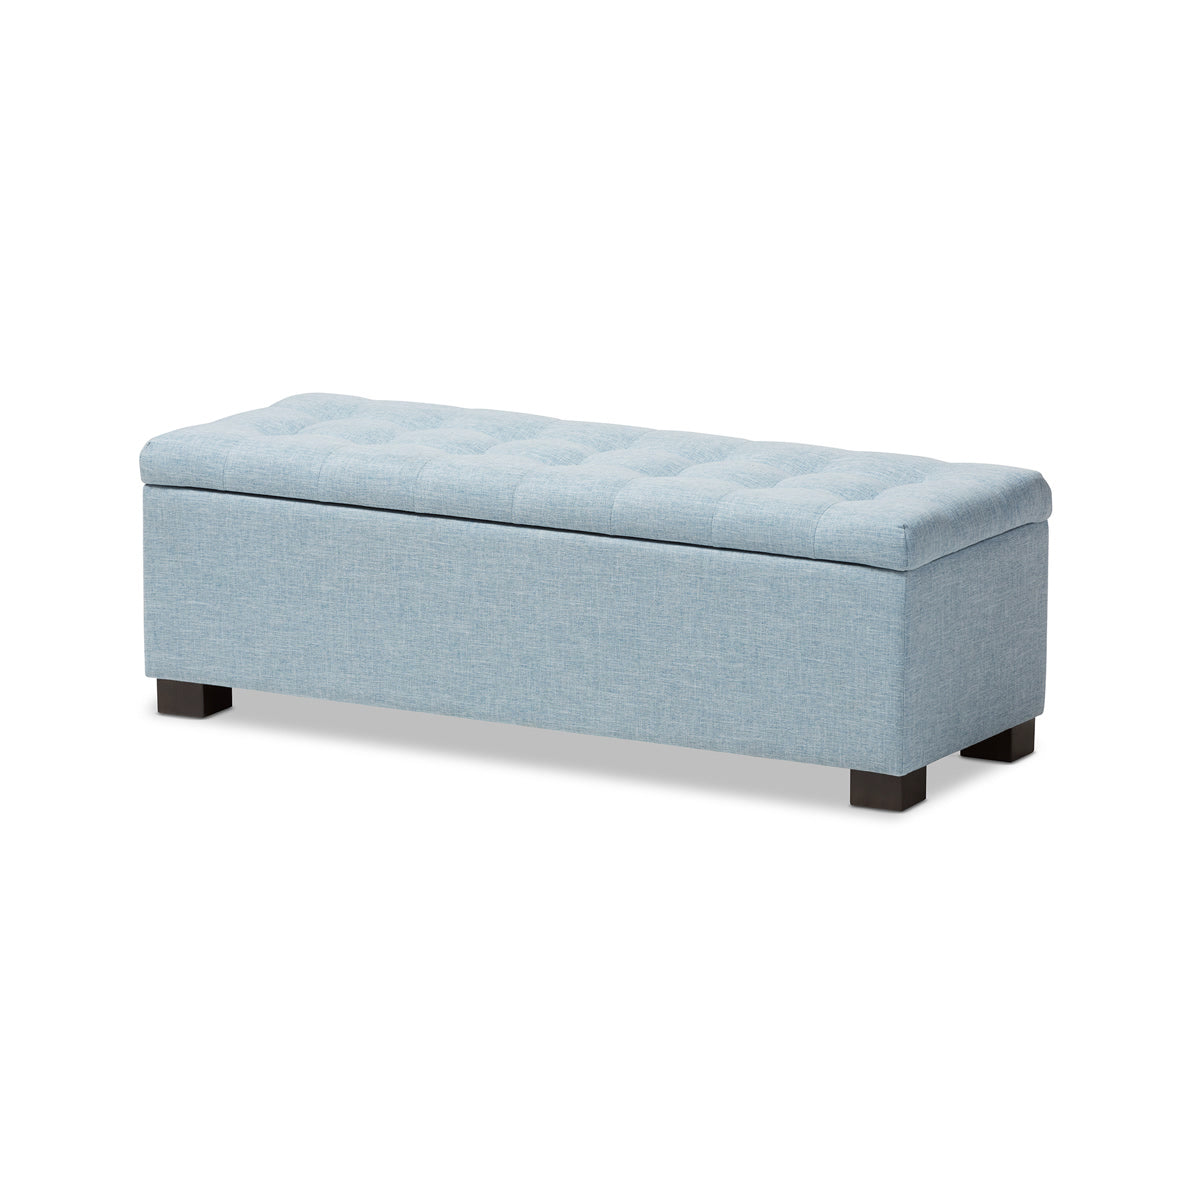 Baxton Studio Roanoke Modern and Contemporary Light Blue Fabric Upholstered Grid-Tufting Storage Ottoman Bench Baxton Studio-benches-Minimal And Modern - 2